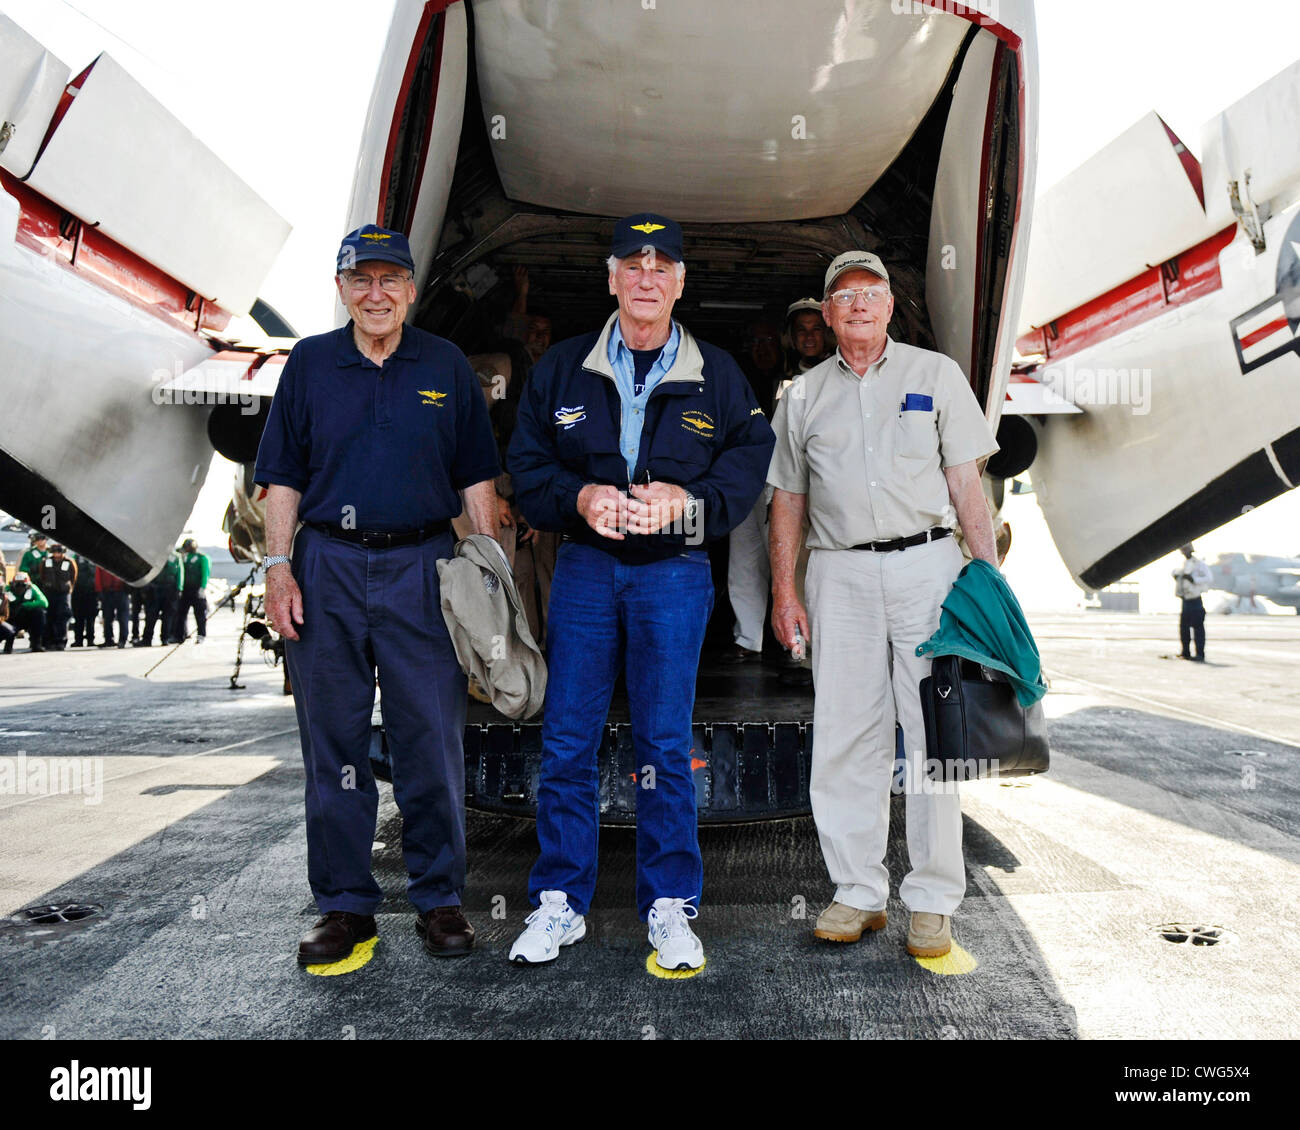 Retired astronauts Capt. Jim Lovell, Capt. Gene Cernan, and Neil Armstrong stand on painted footprints to commemorate their Legends of Aerospace tour aboard the aircraft carrier USS Harry S. Truman. The astronauts visited the ship to meet with sailors and Marines. The Harry S. Truman Carrier Strike Group is deployed in support of maritime security operations and theater security cooperation efforts in the U.S. 5th Fleet area of responsibility. Stock Photo